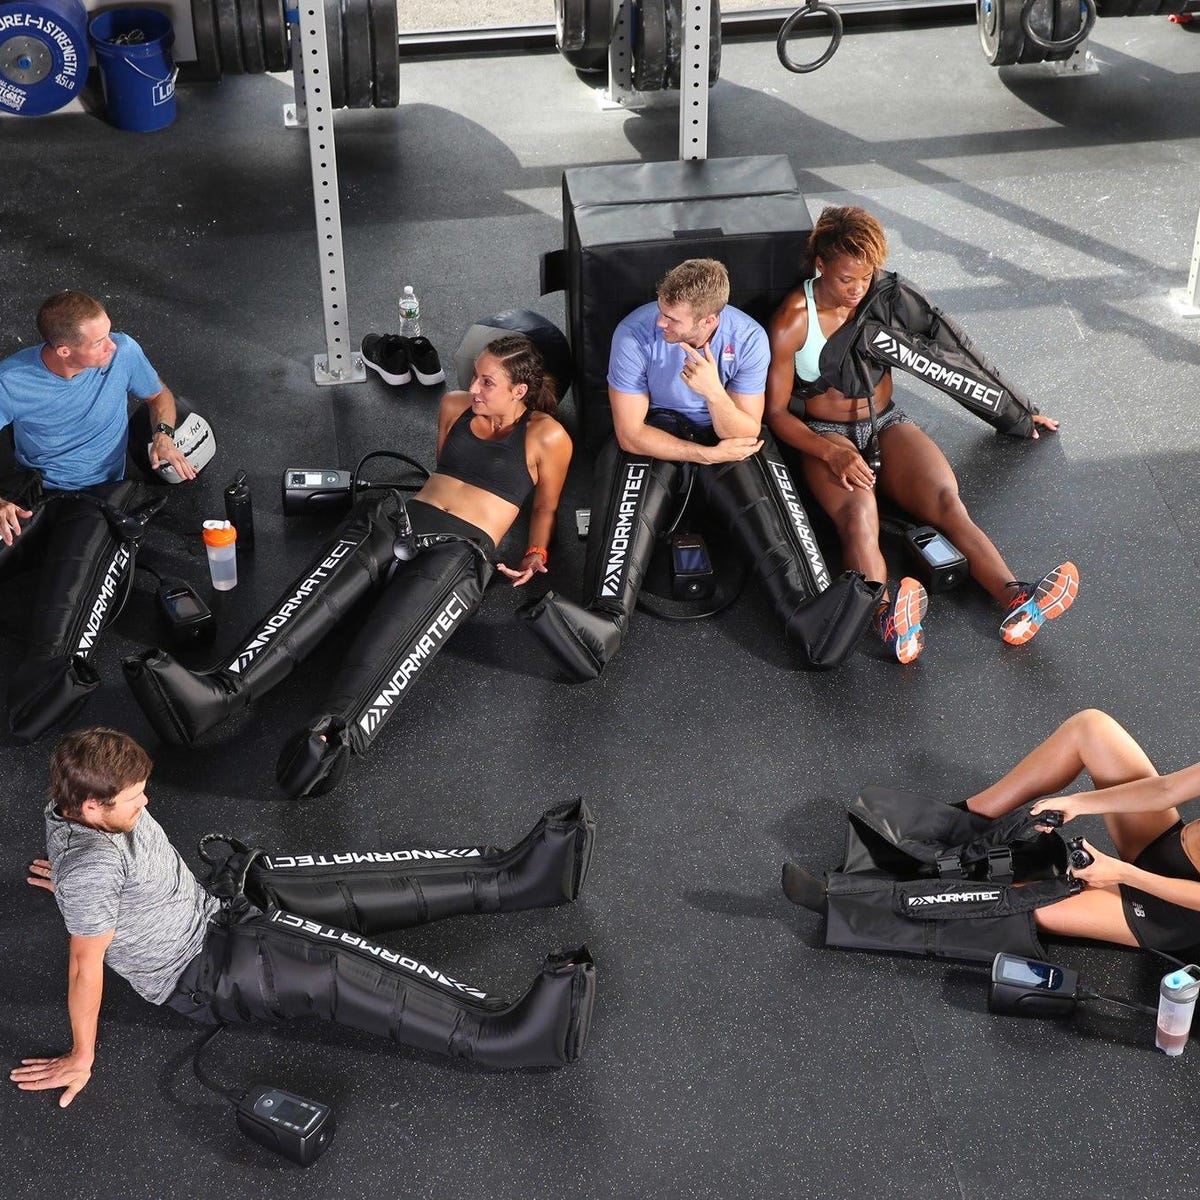 What's a NormaTec? The compression therapy elite athletes love - CNET